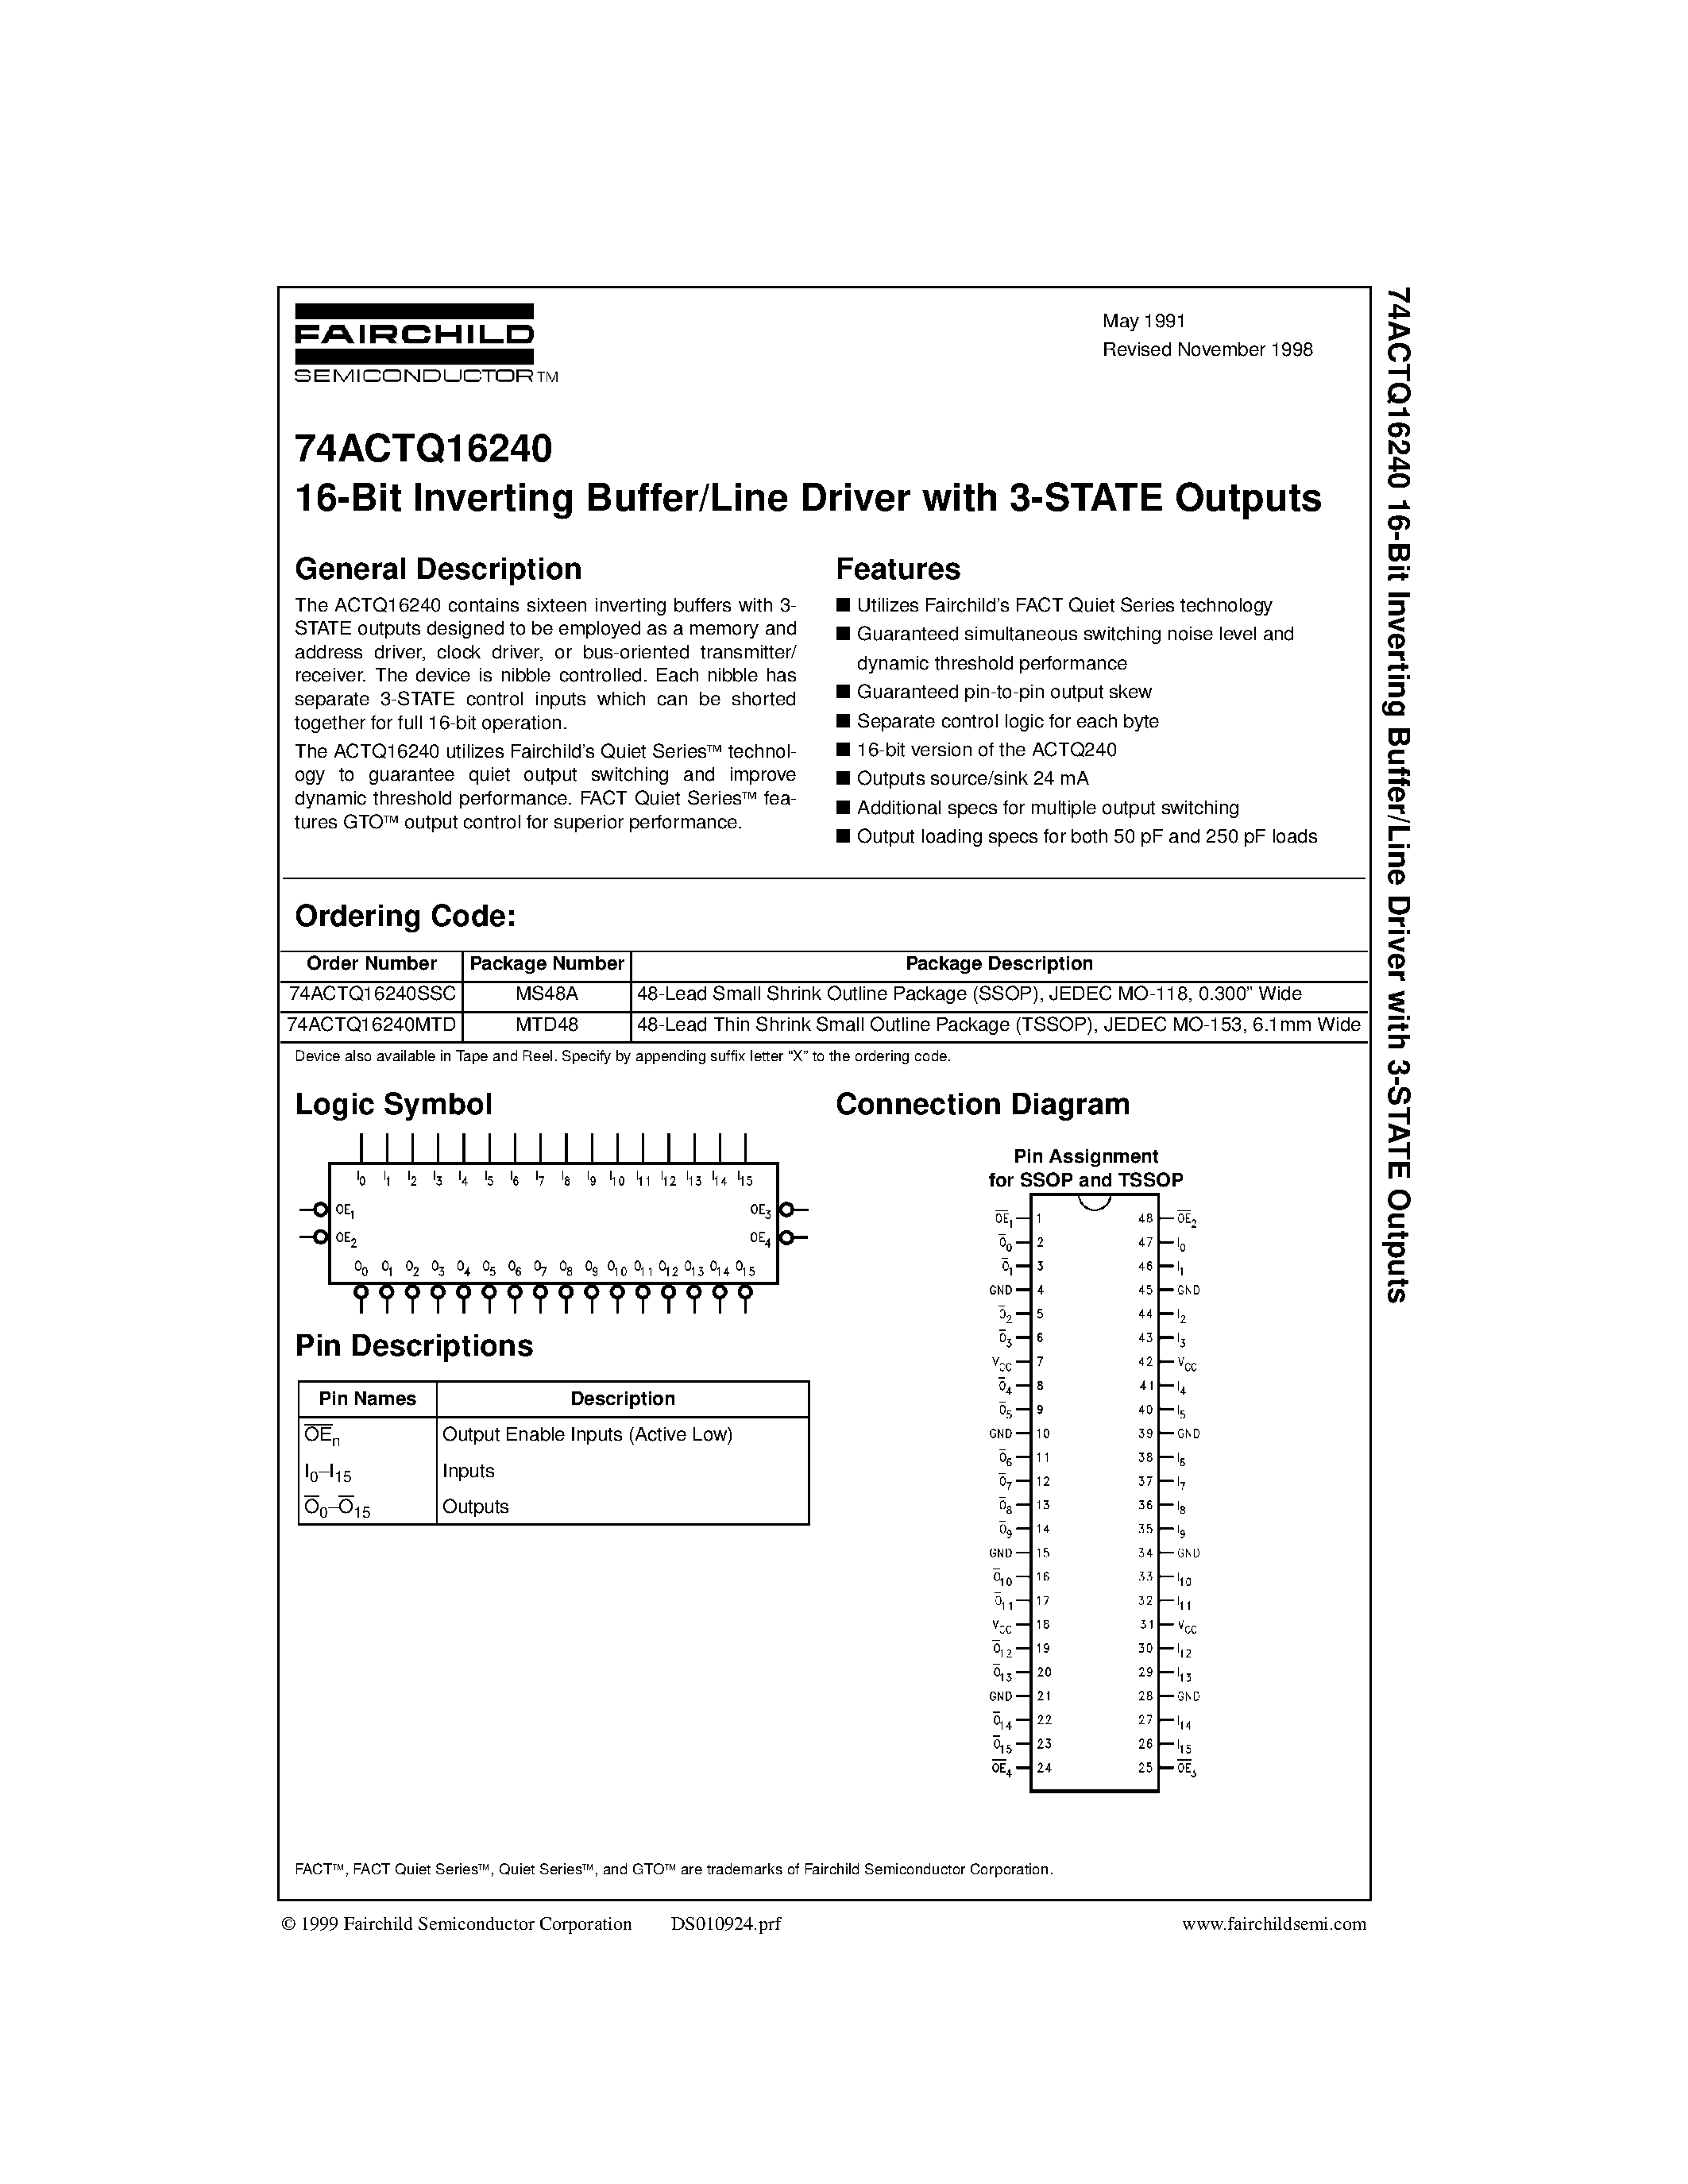 Datasheet 74ACTQ16240 - 16-Bit Inverting Buffer/Line Driver with 3-STATE Outputs page 1